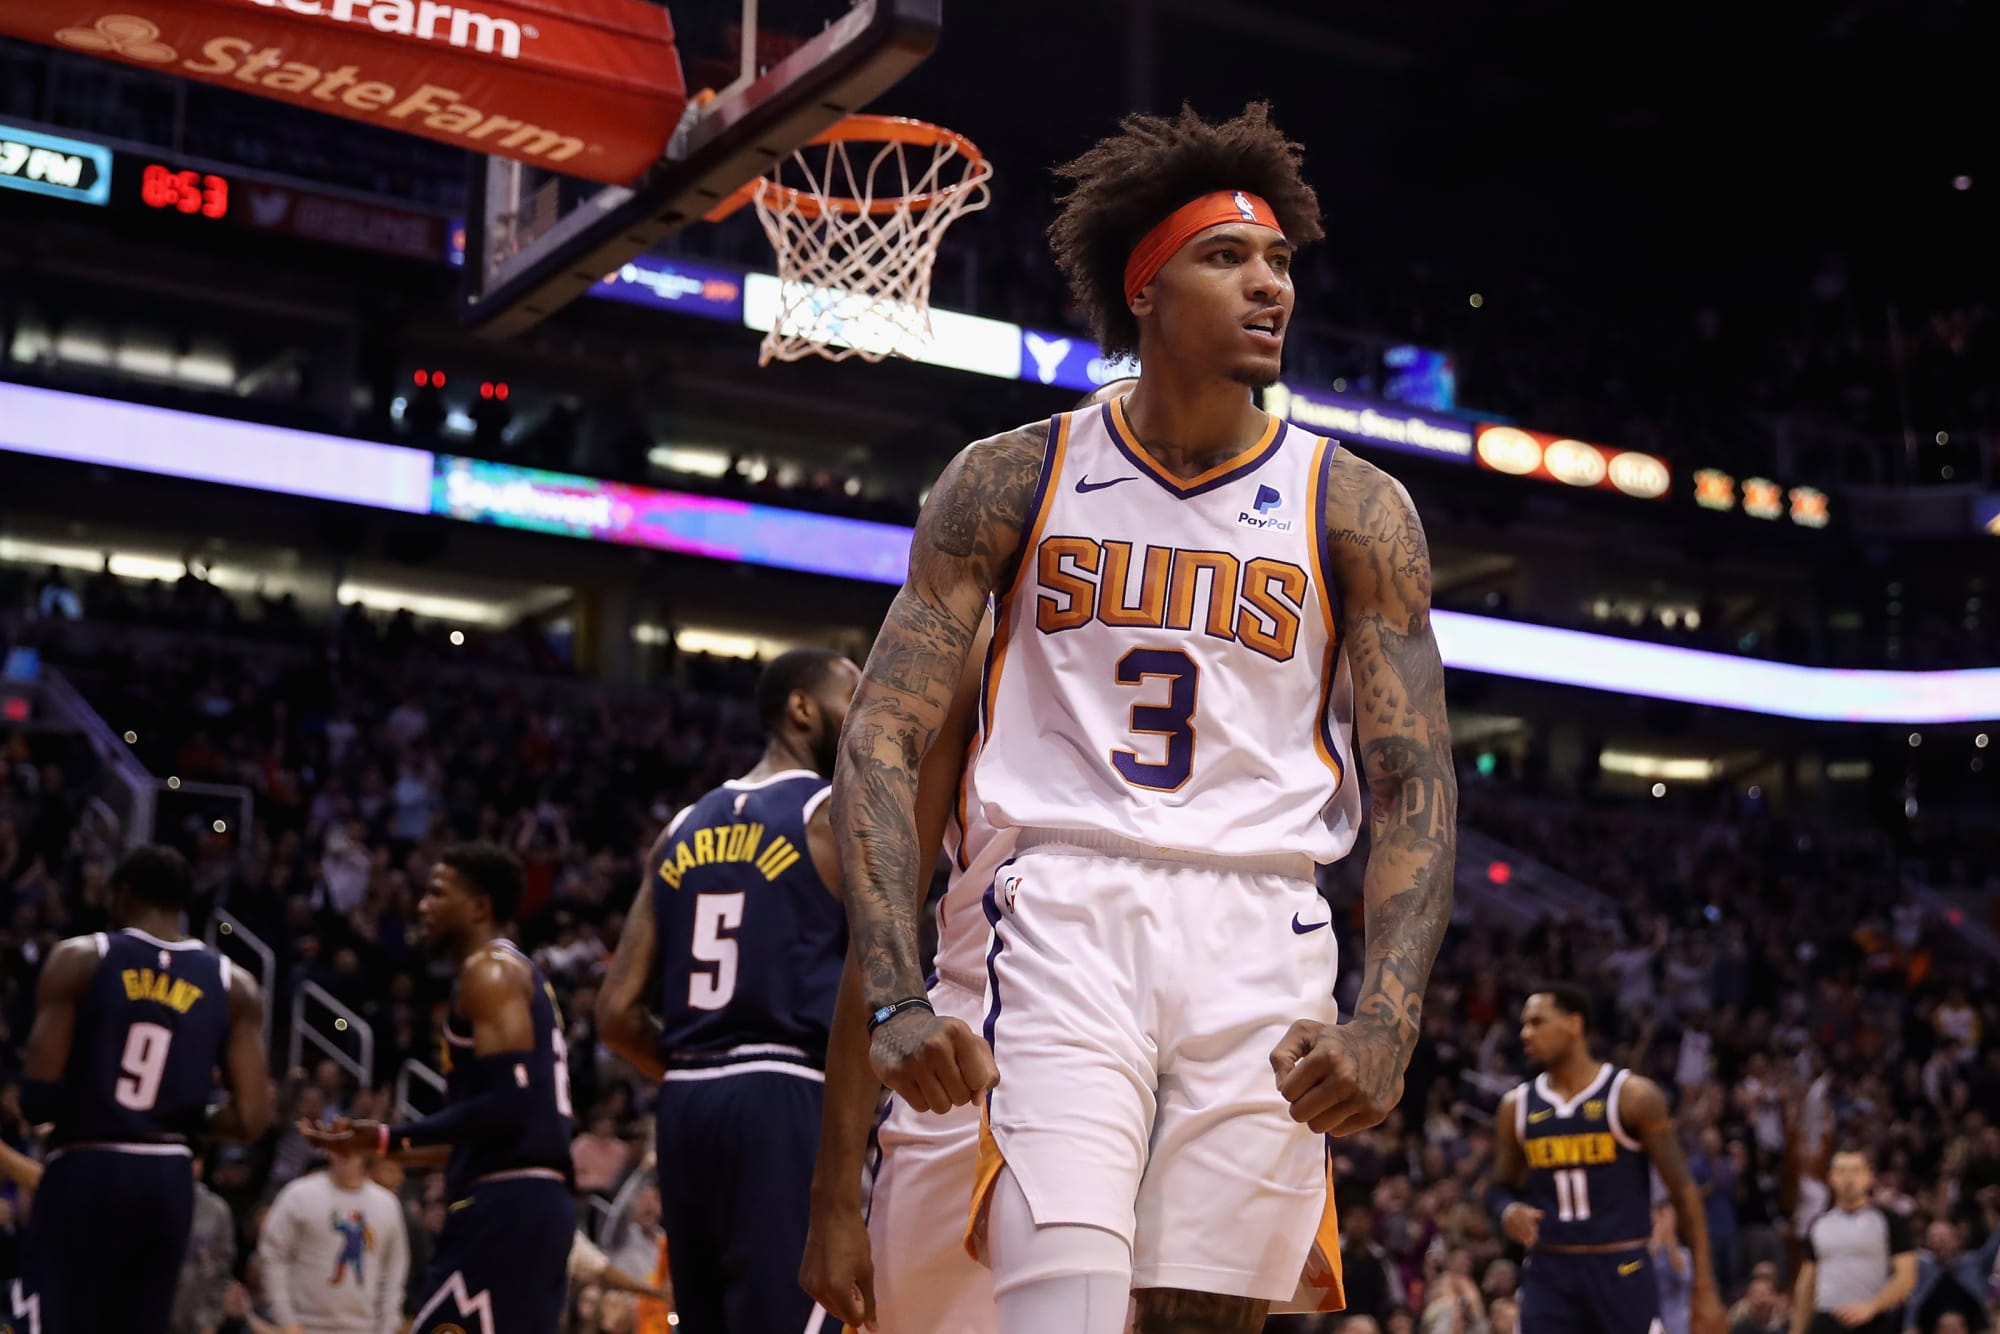 I'm fly': Five takeaways from Kelly Oubre Jr.'s Phoenix Suns home